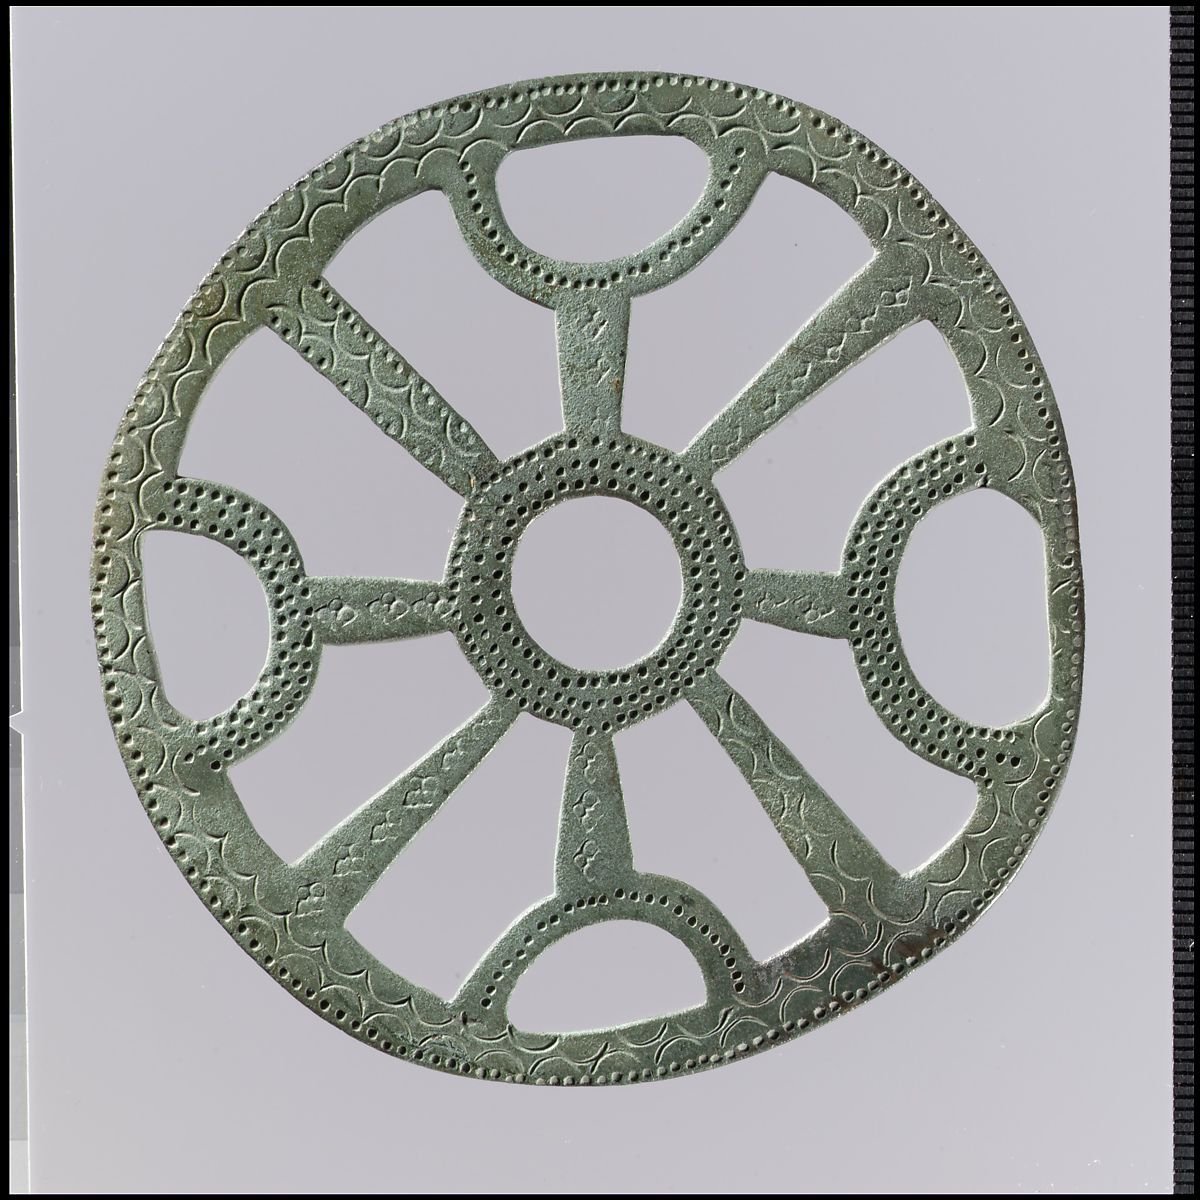 Something I have often wondered is how hard it is to do openwork, but without the modern jeweller's saw. Nowadays, we'd say fretwork, or piercing, but it's quite different to the medieval method, which either involved chisels, or casting. https://www.metmuseum.org/art/collection/search/464956